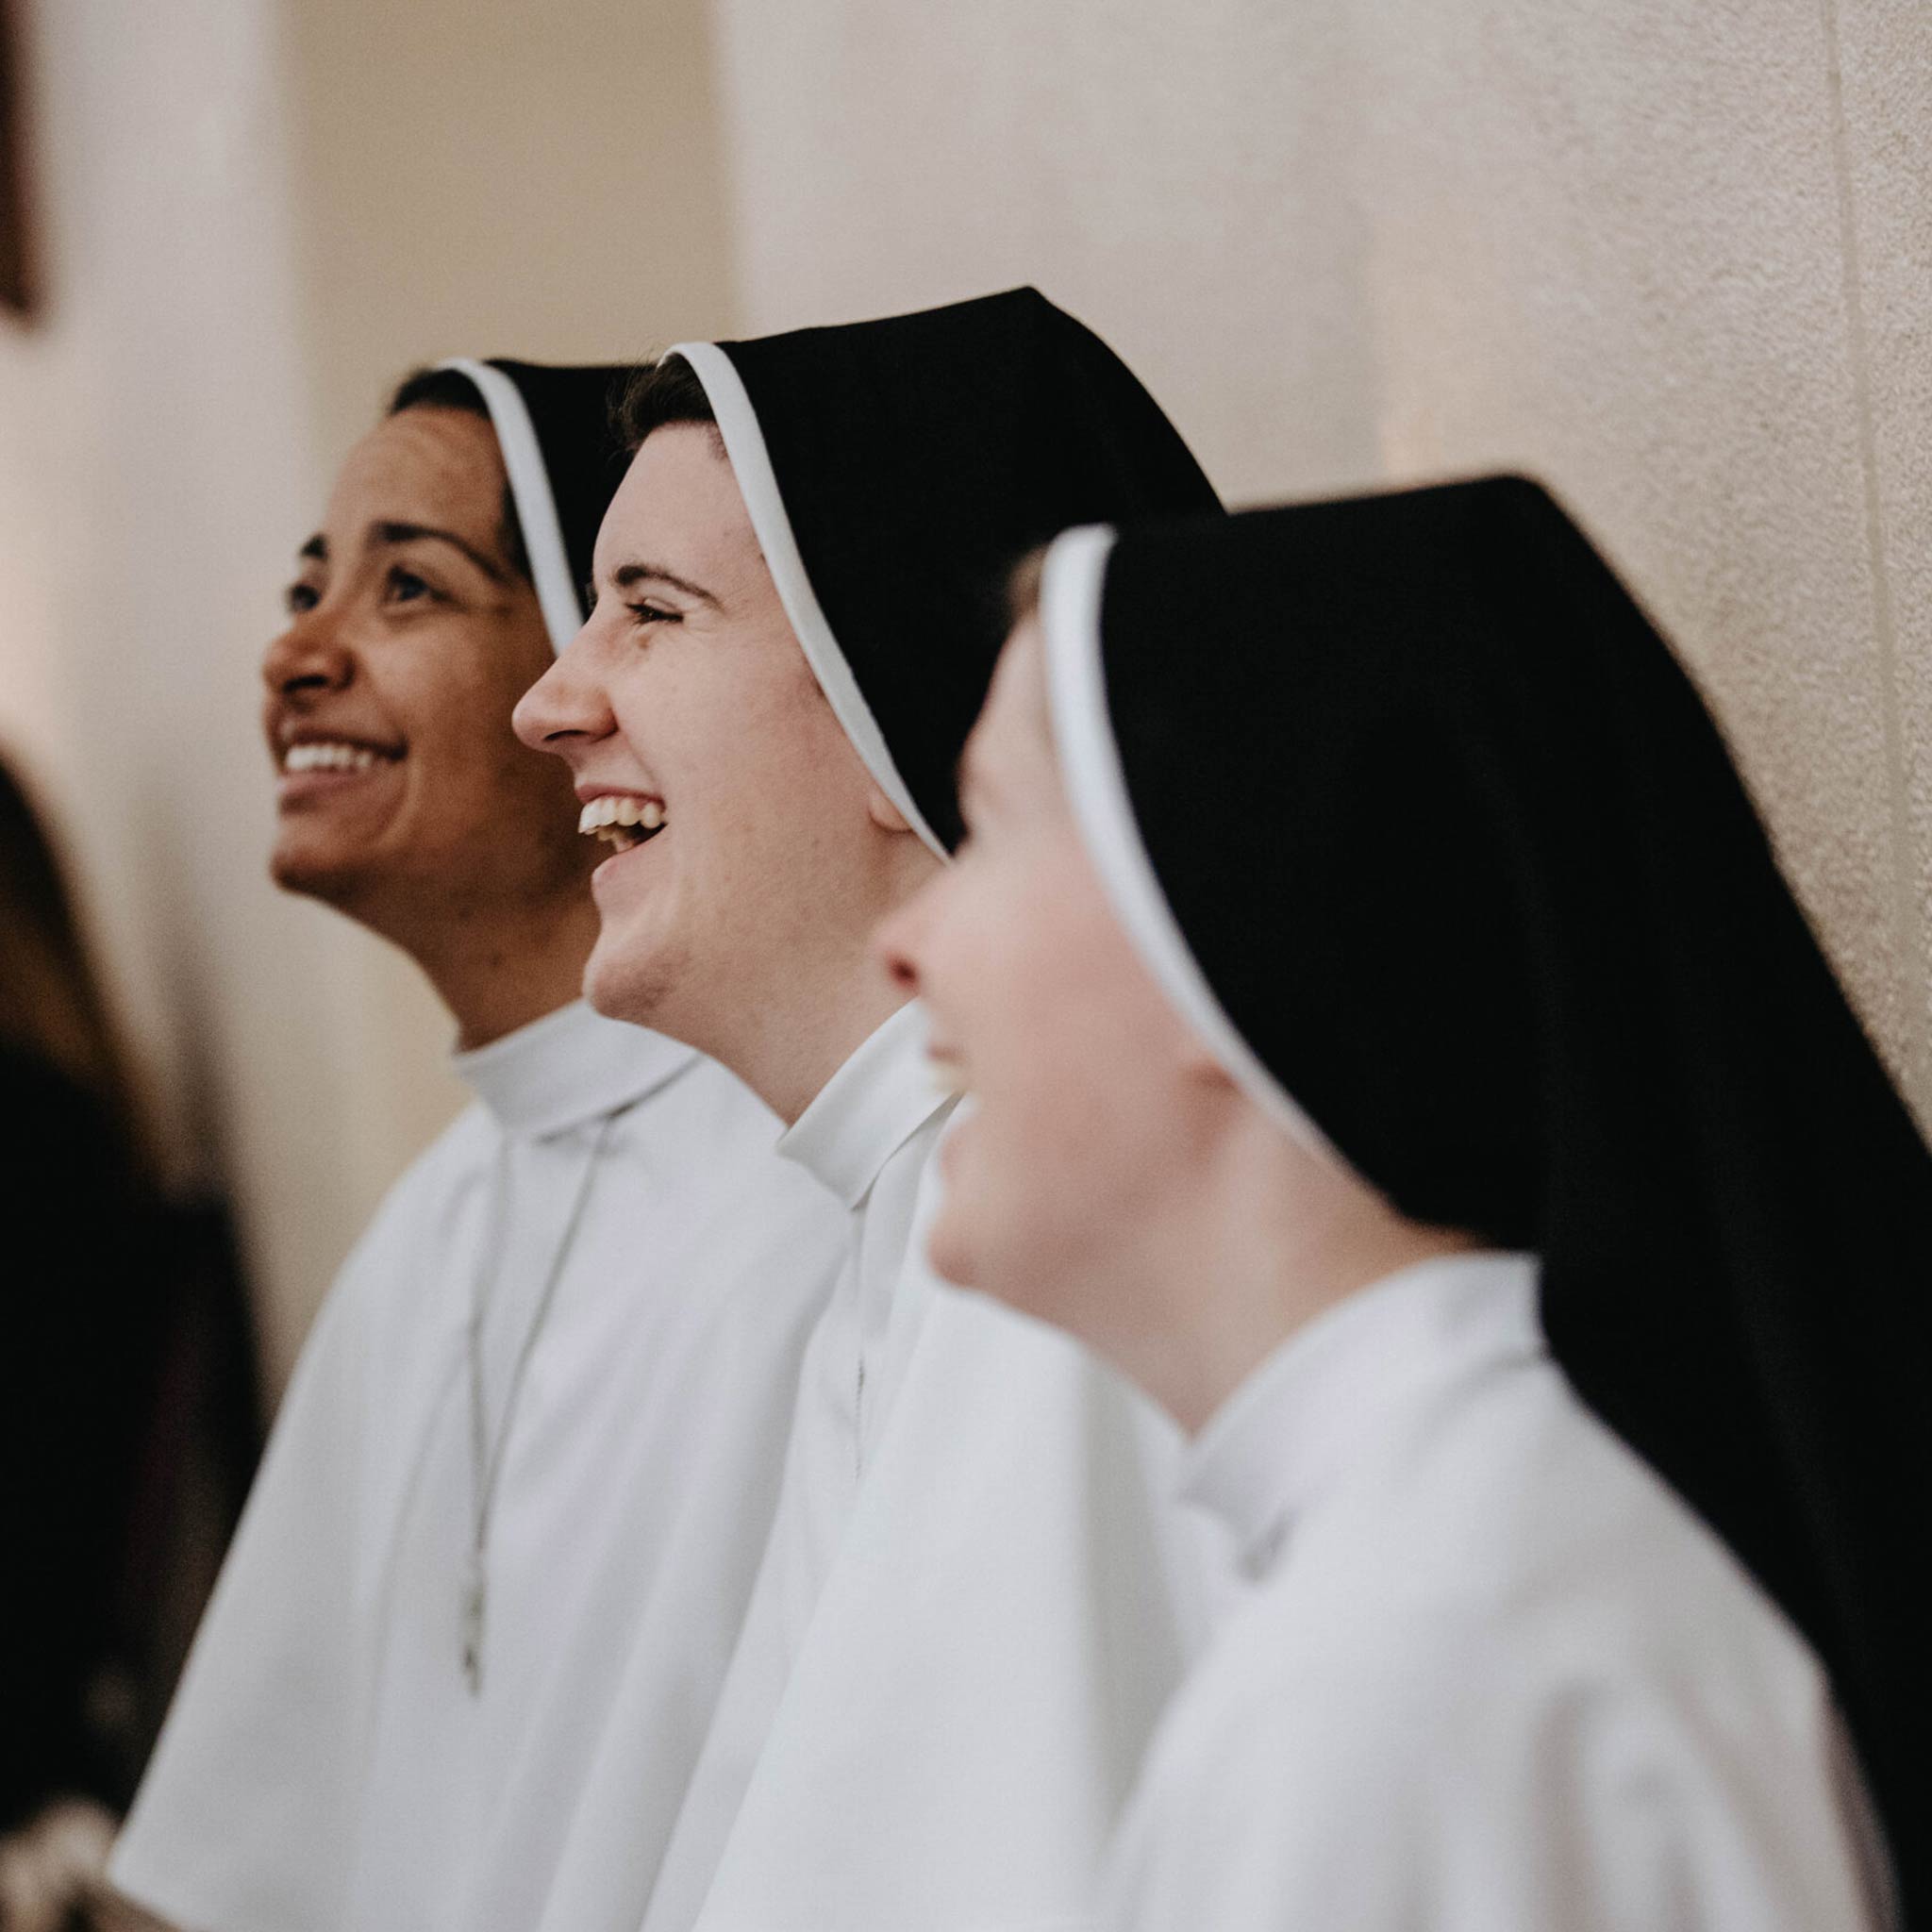 Group photo of nuns laughing